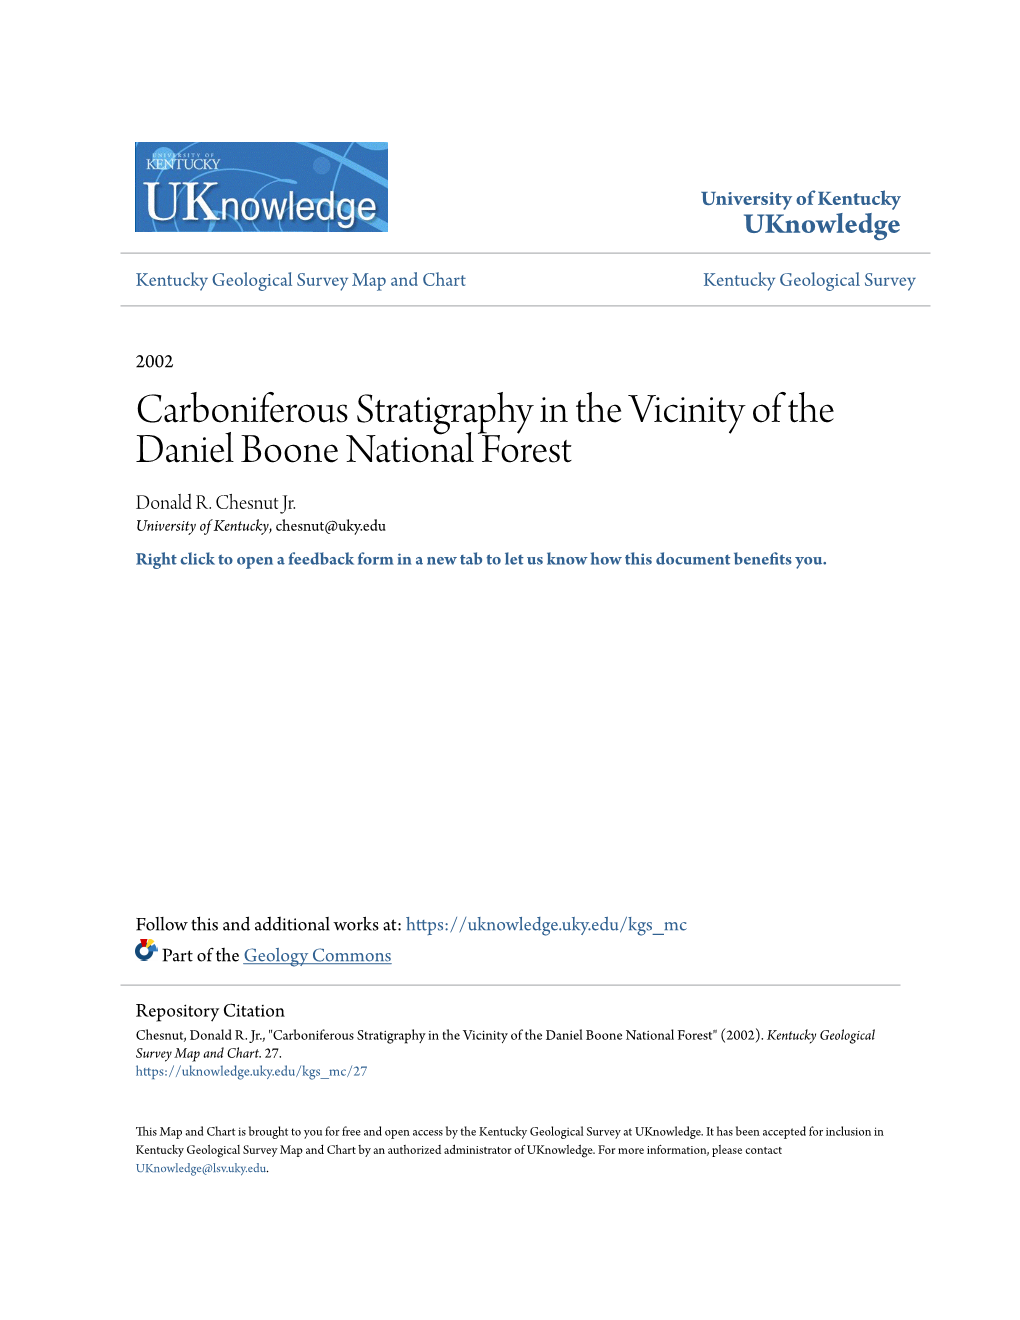 Carboniferous Stratigraphy in the Vicinity of the Daniel Boone National Forest Donald R